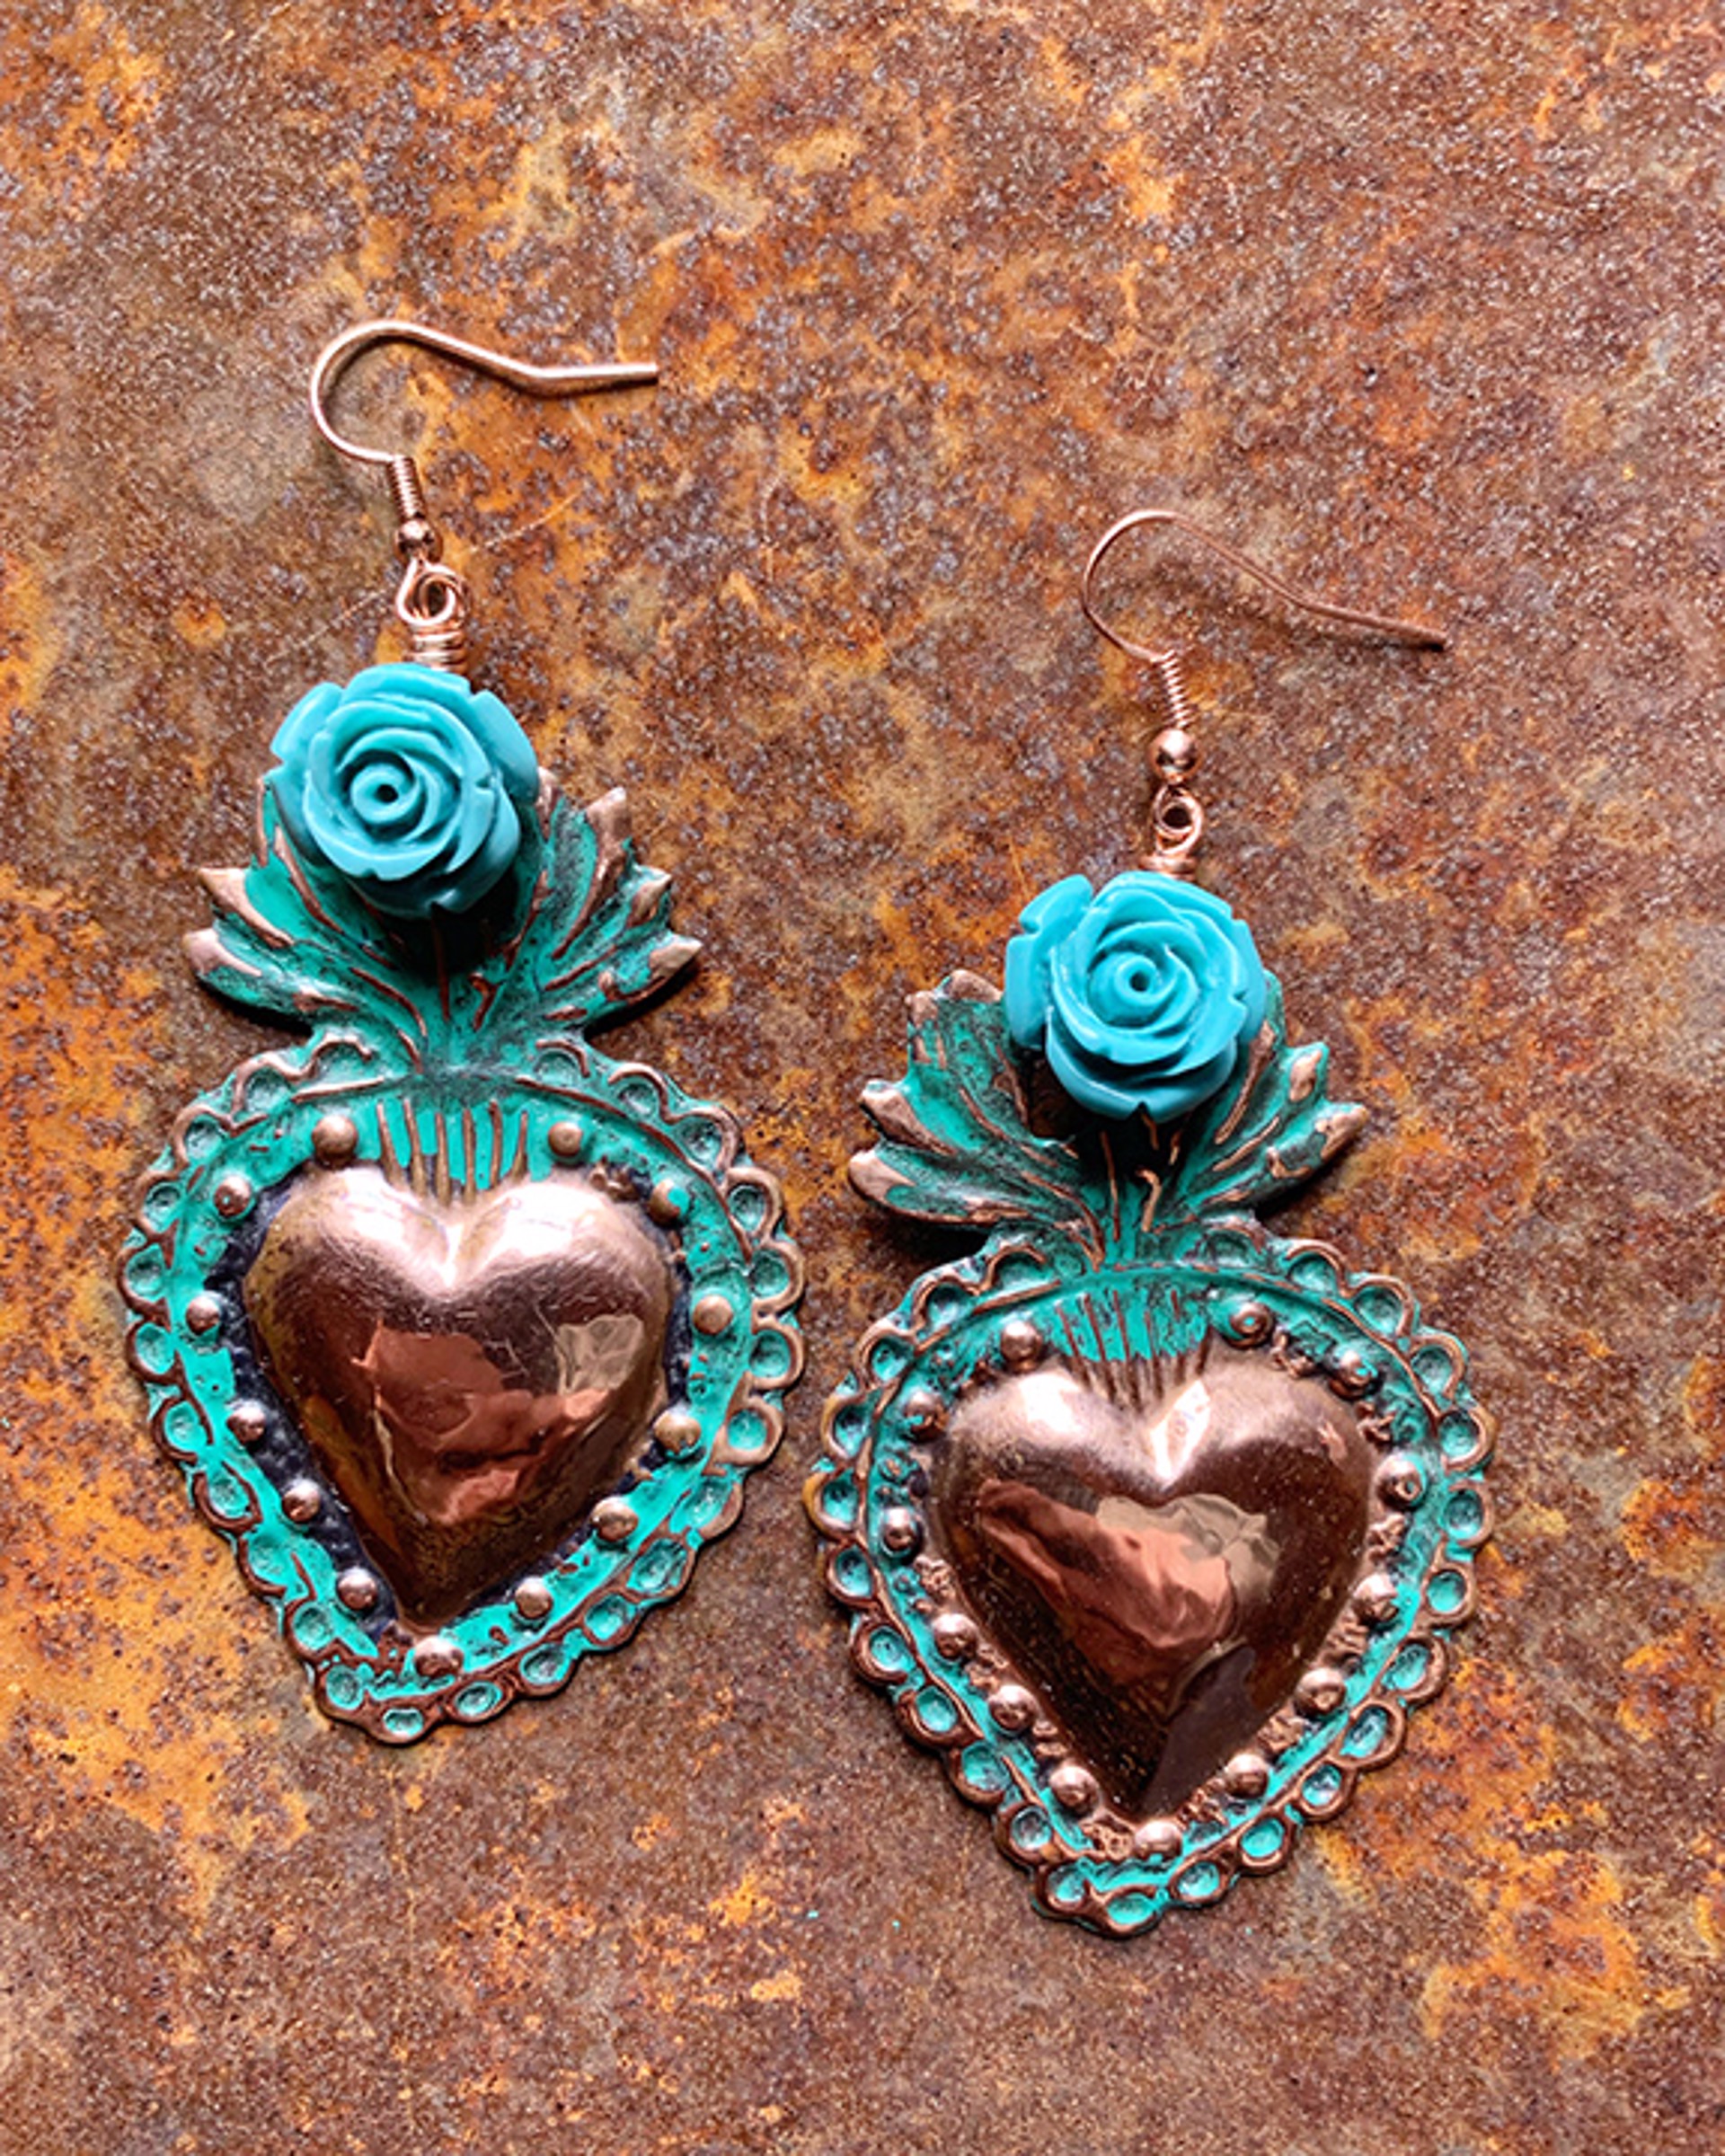 K724 Sacred Heart Earrings with Turquoise Roses by Kelly Ormsby